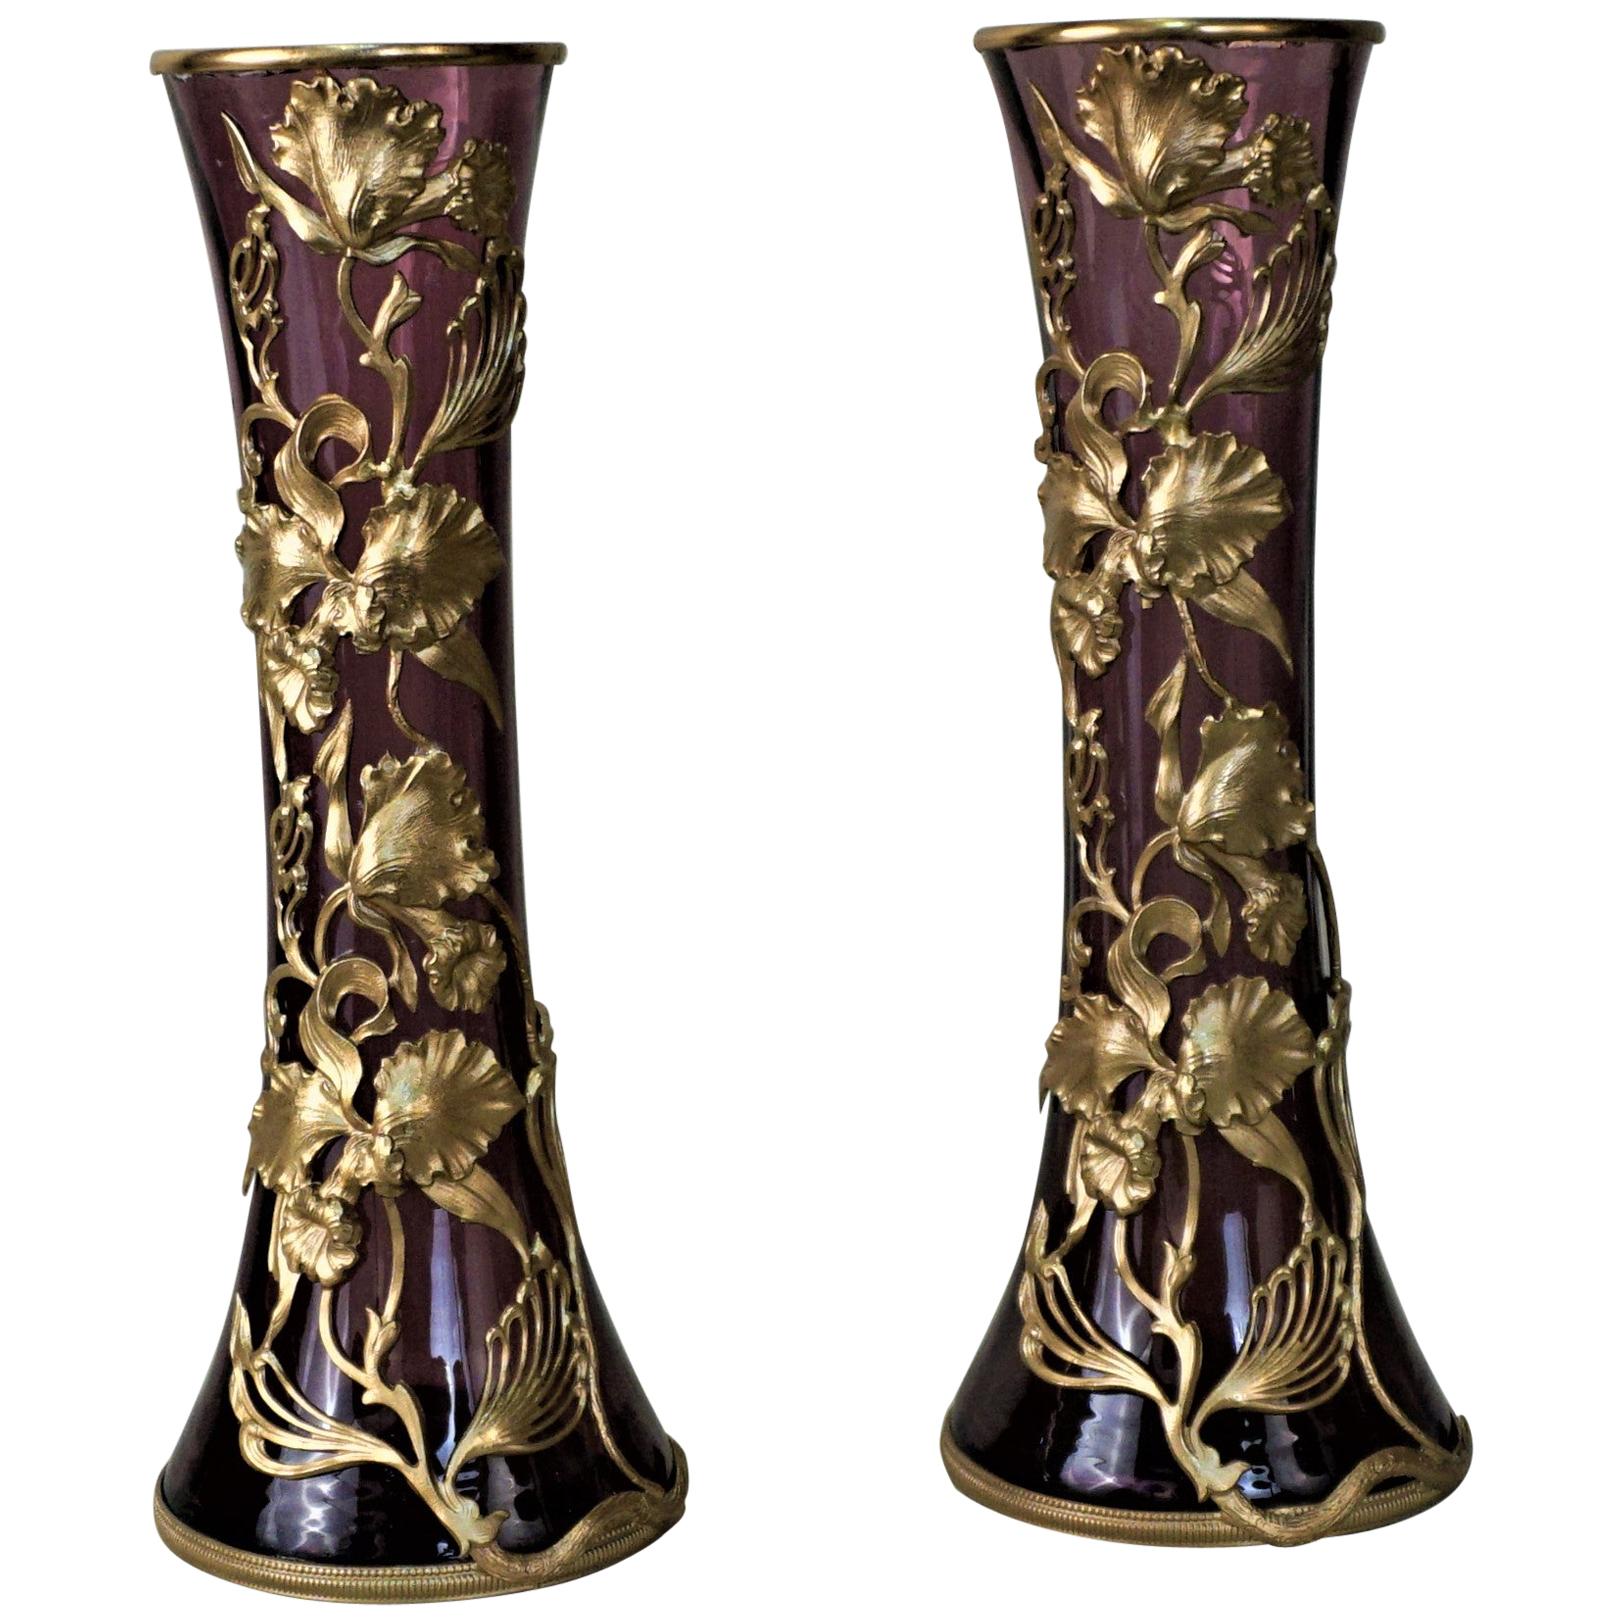 Pair of Art Nouveau Glass Vases with Flower Bronze Overlay